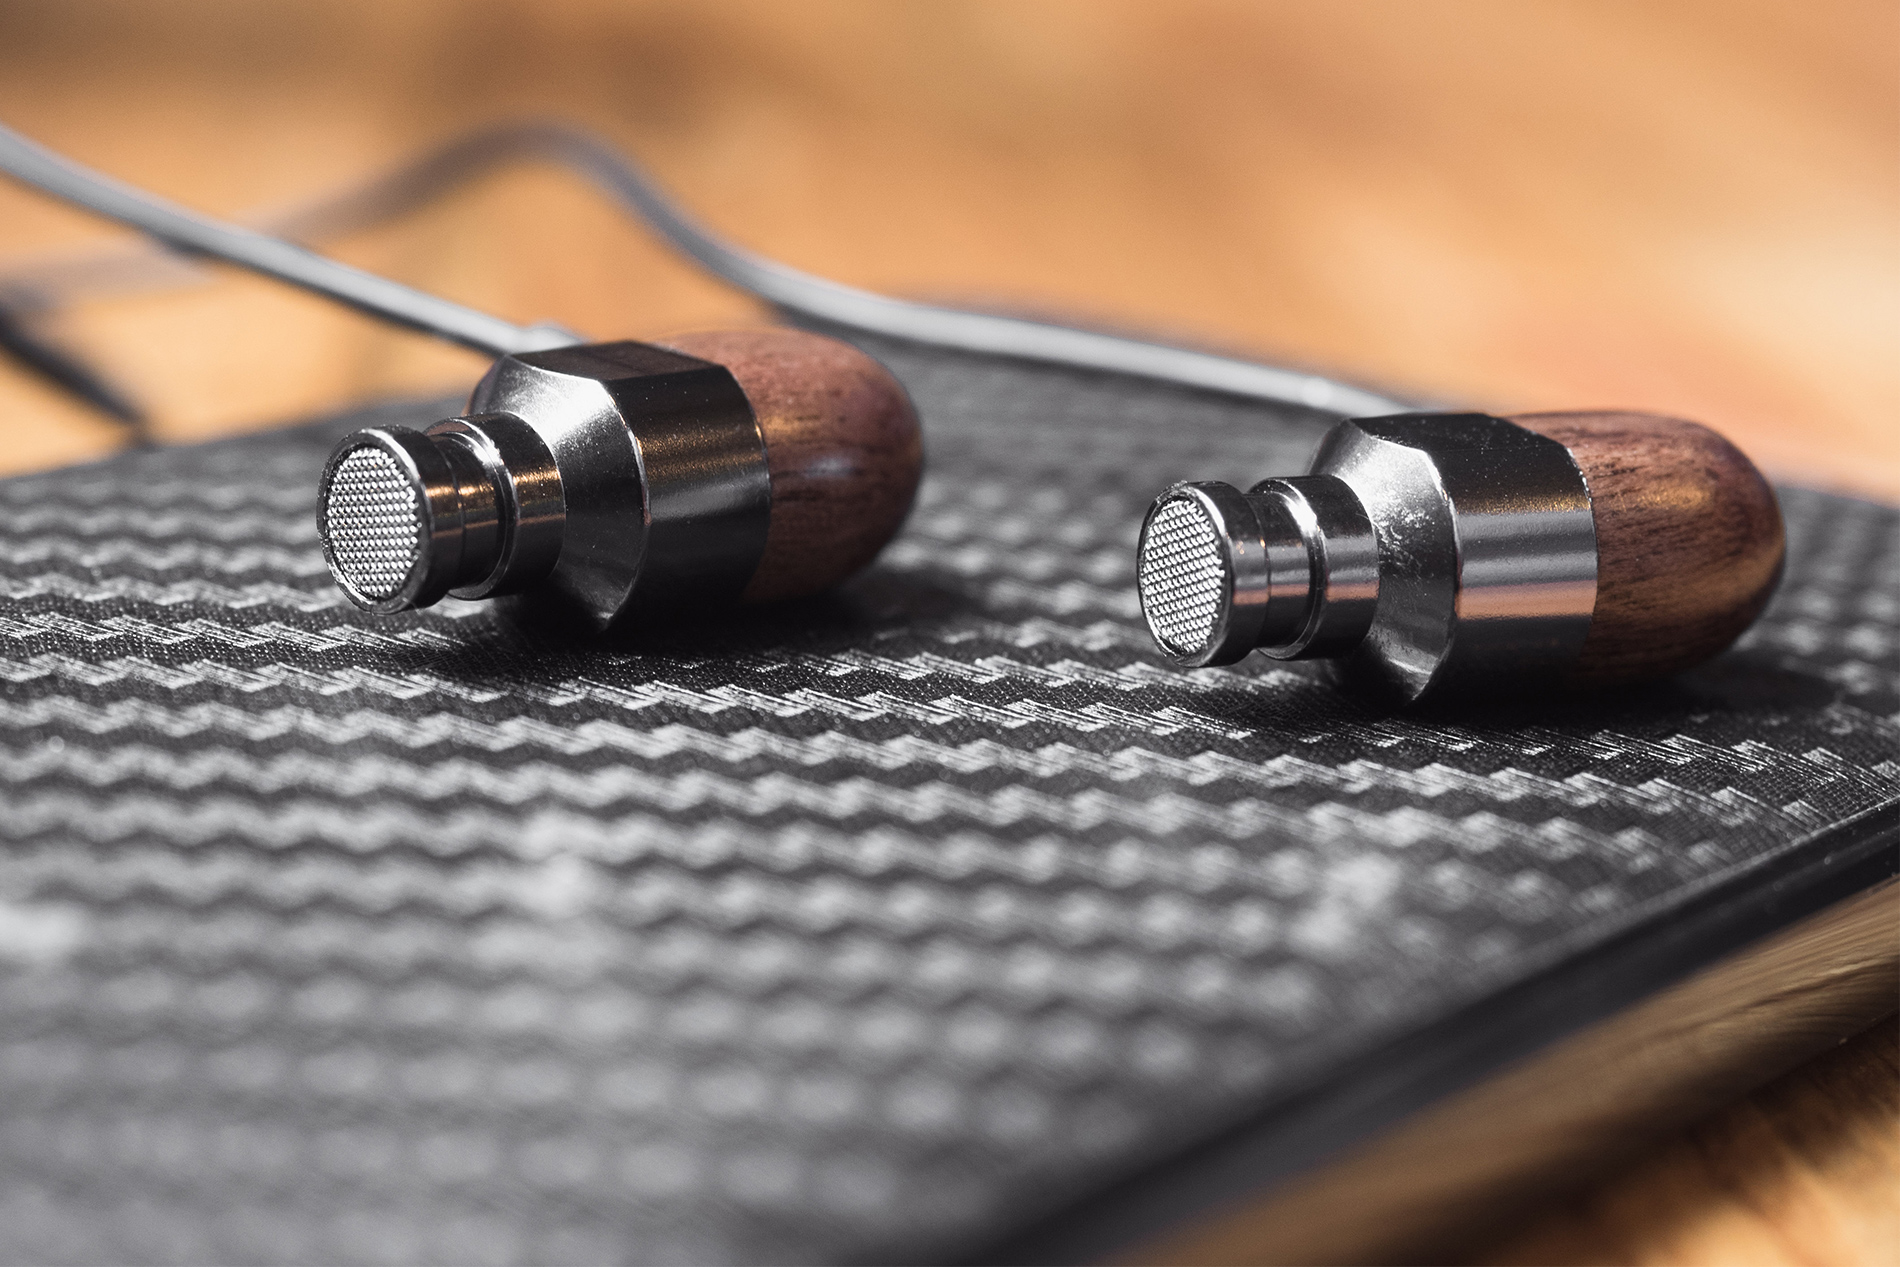 Thinksound ts03+mic review: The earbuds on a light-colored wood surface surrounded by an LG G6 in the background.